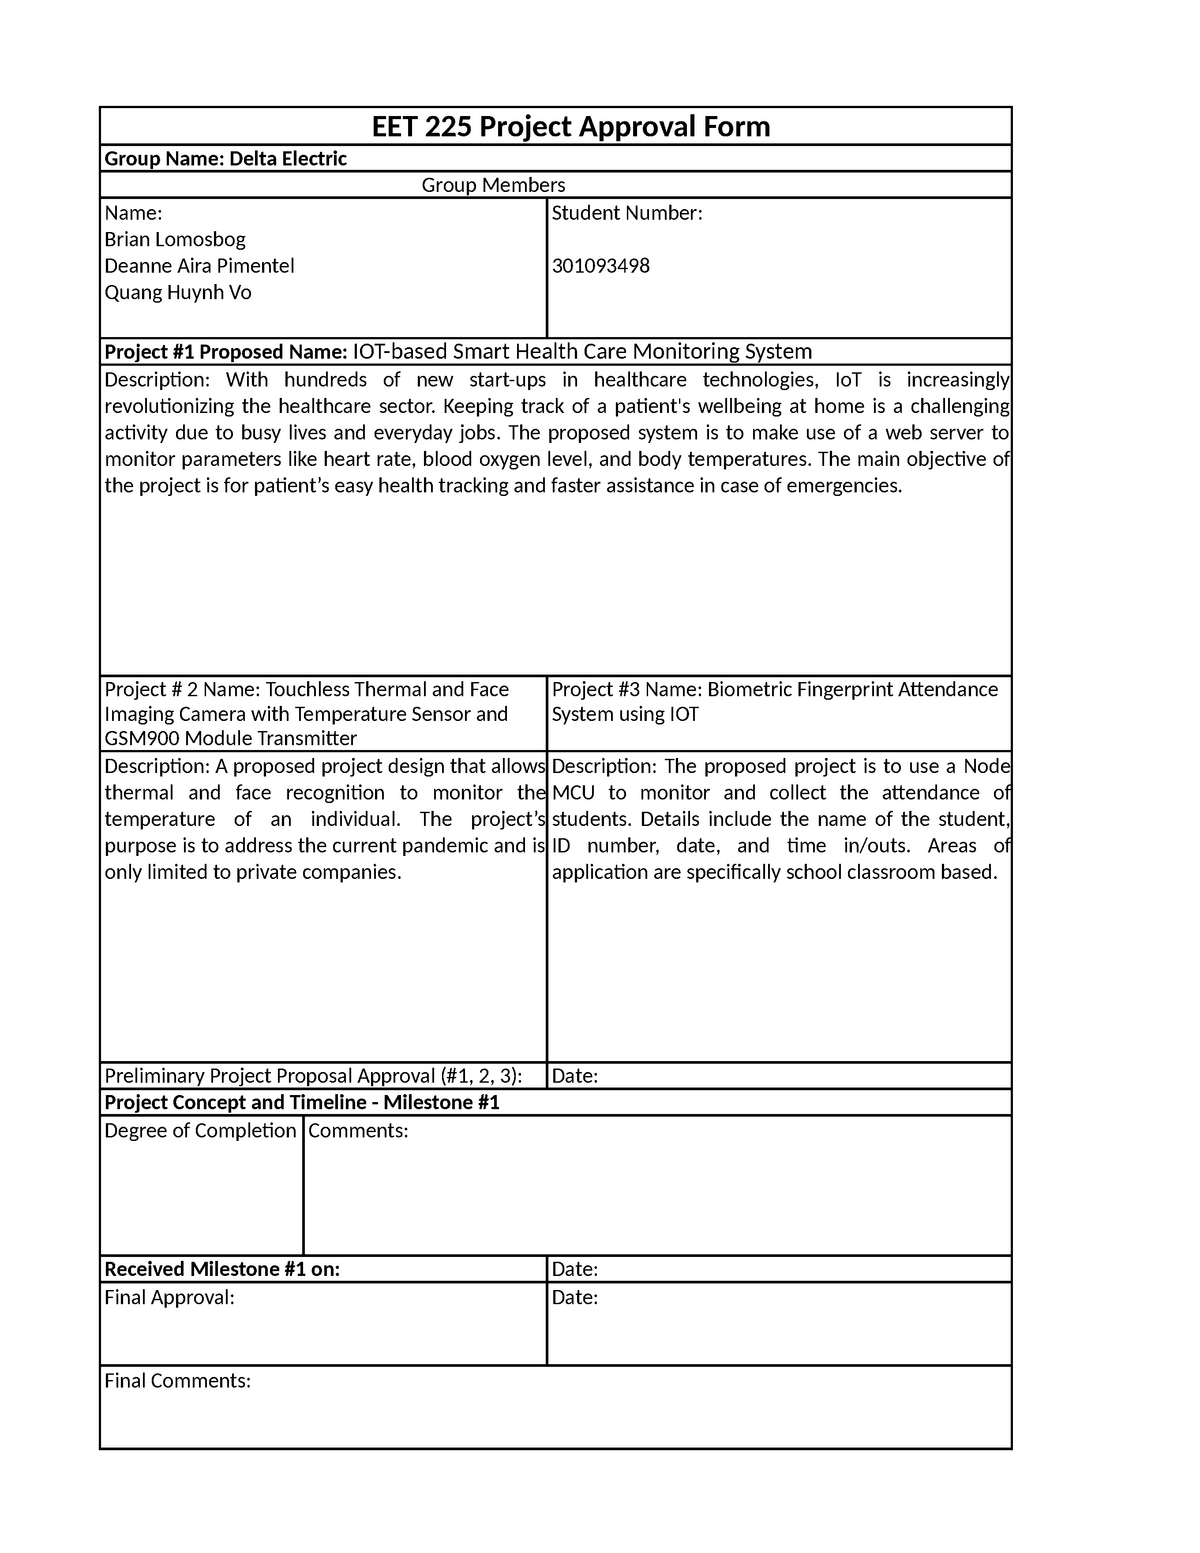 EET-225 Project Approval form-converted - EET 225 Project Approval Form ...